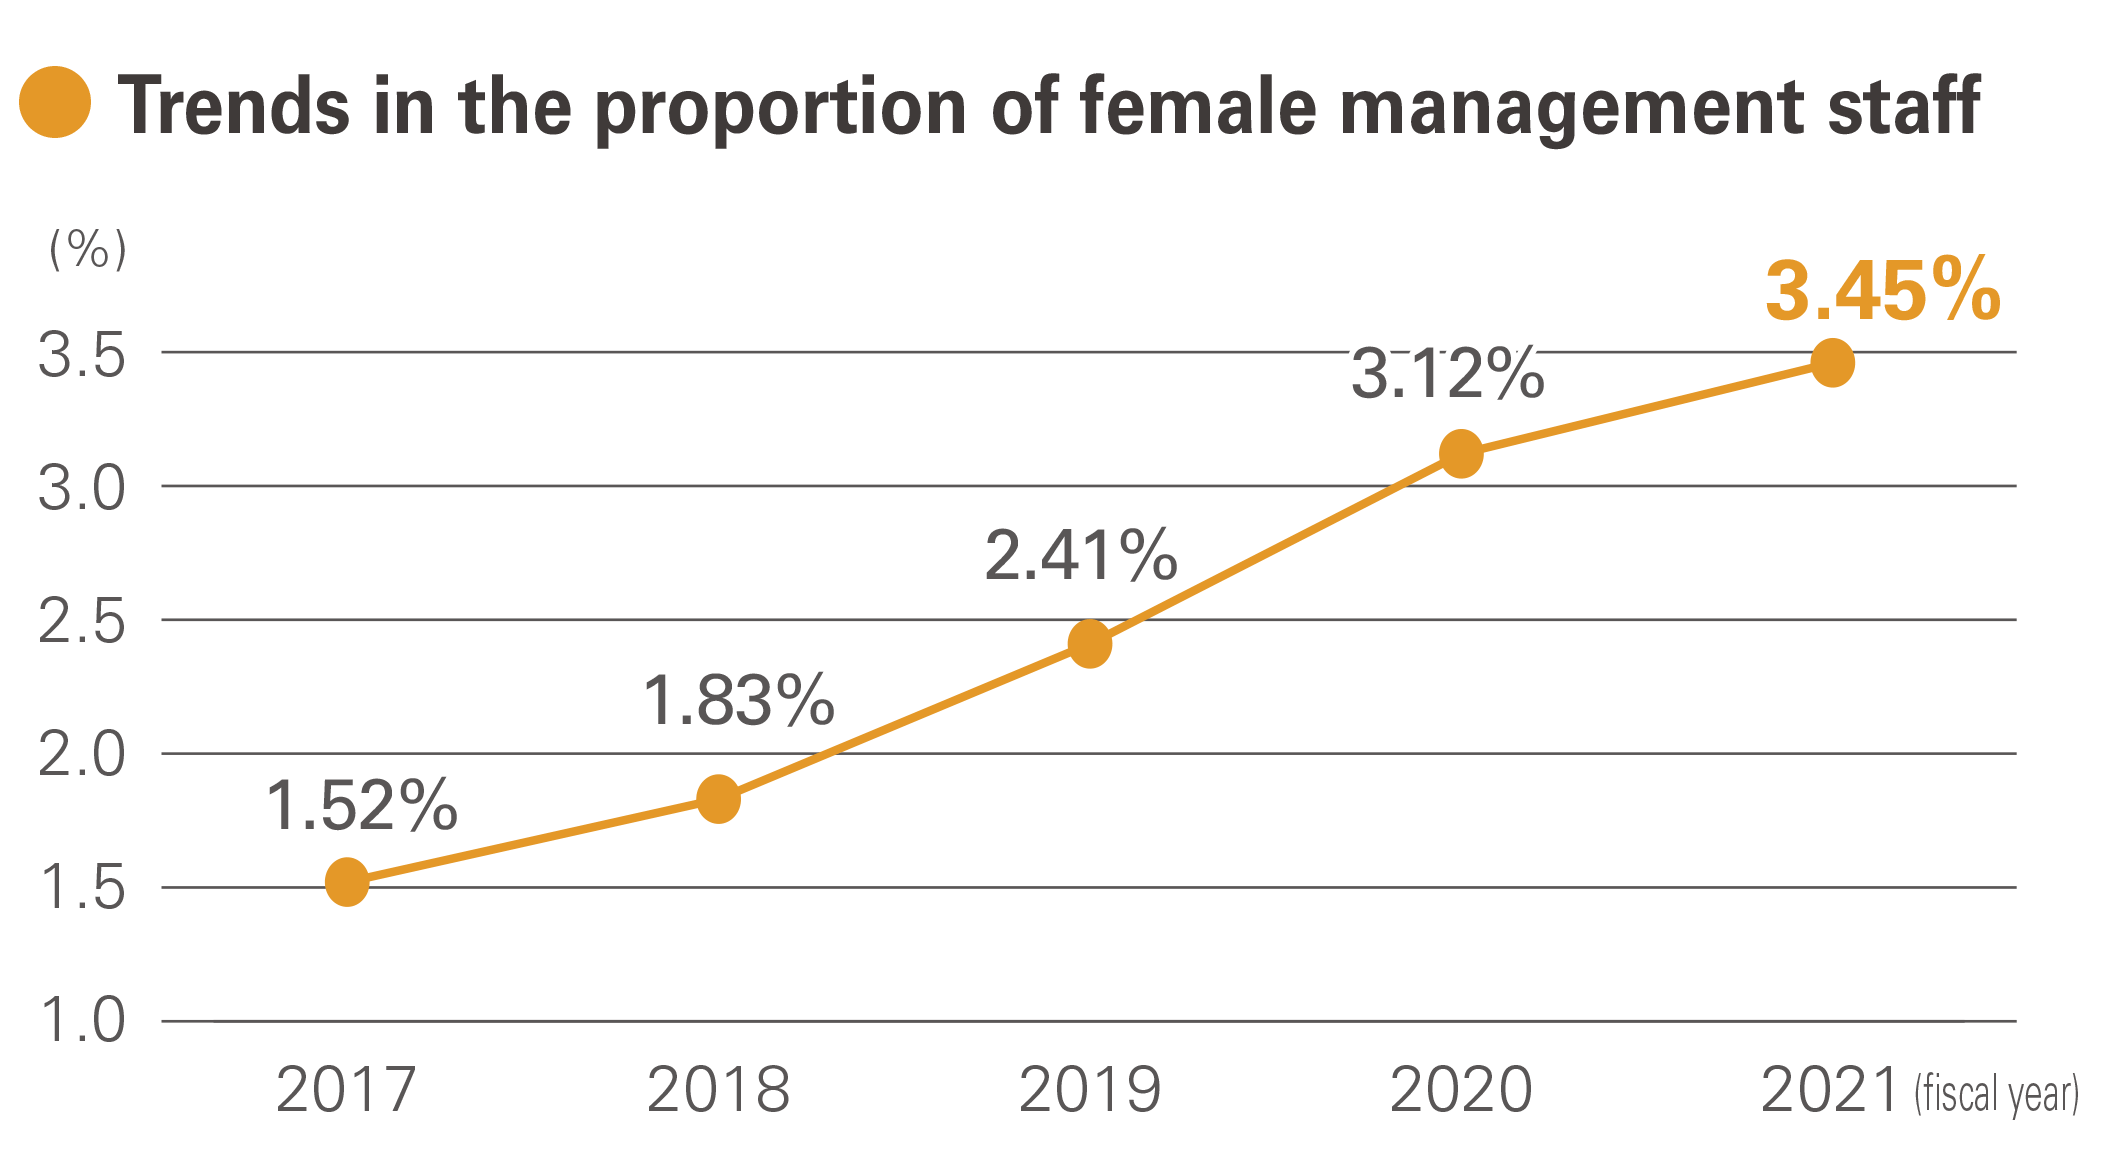 Trends in the proportion of female management staff